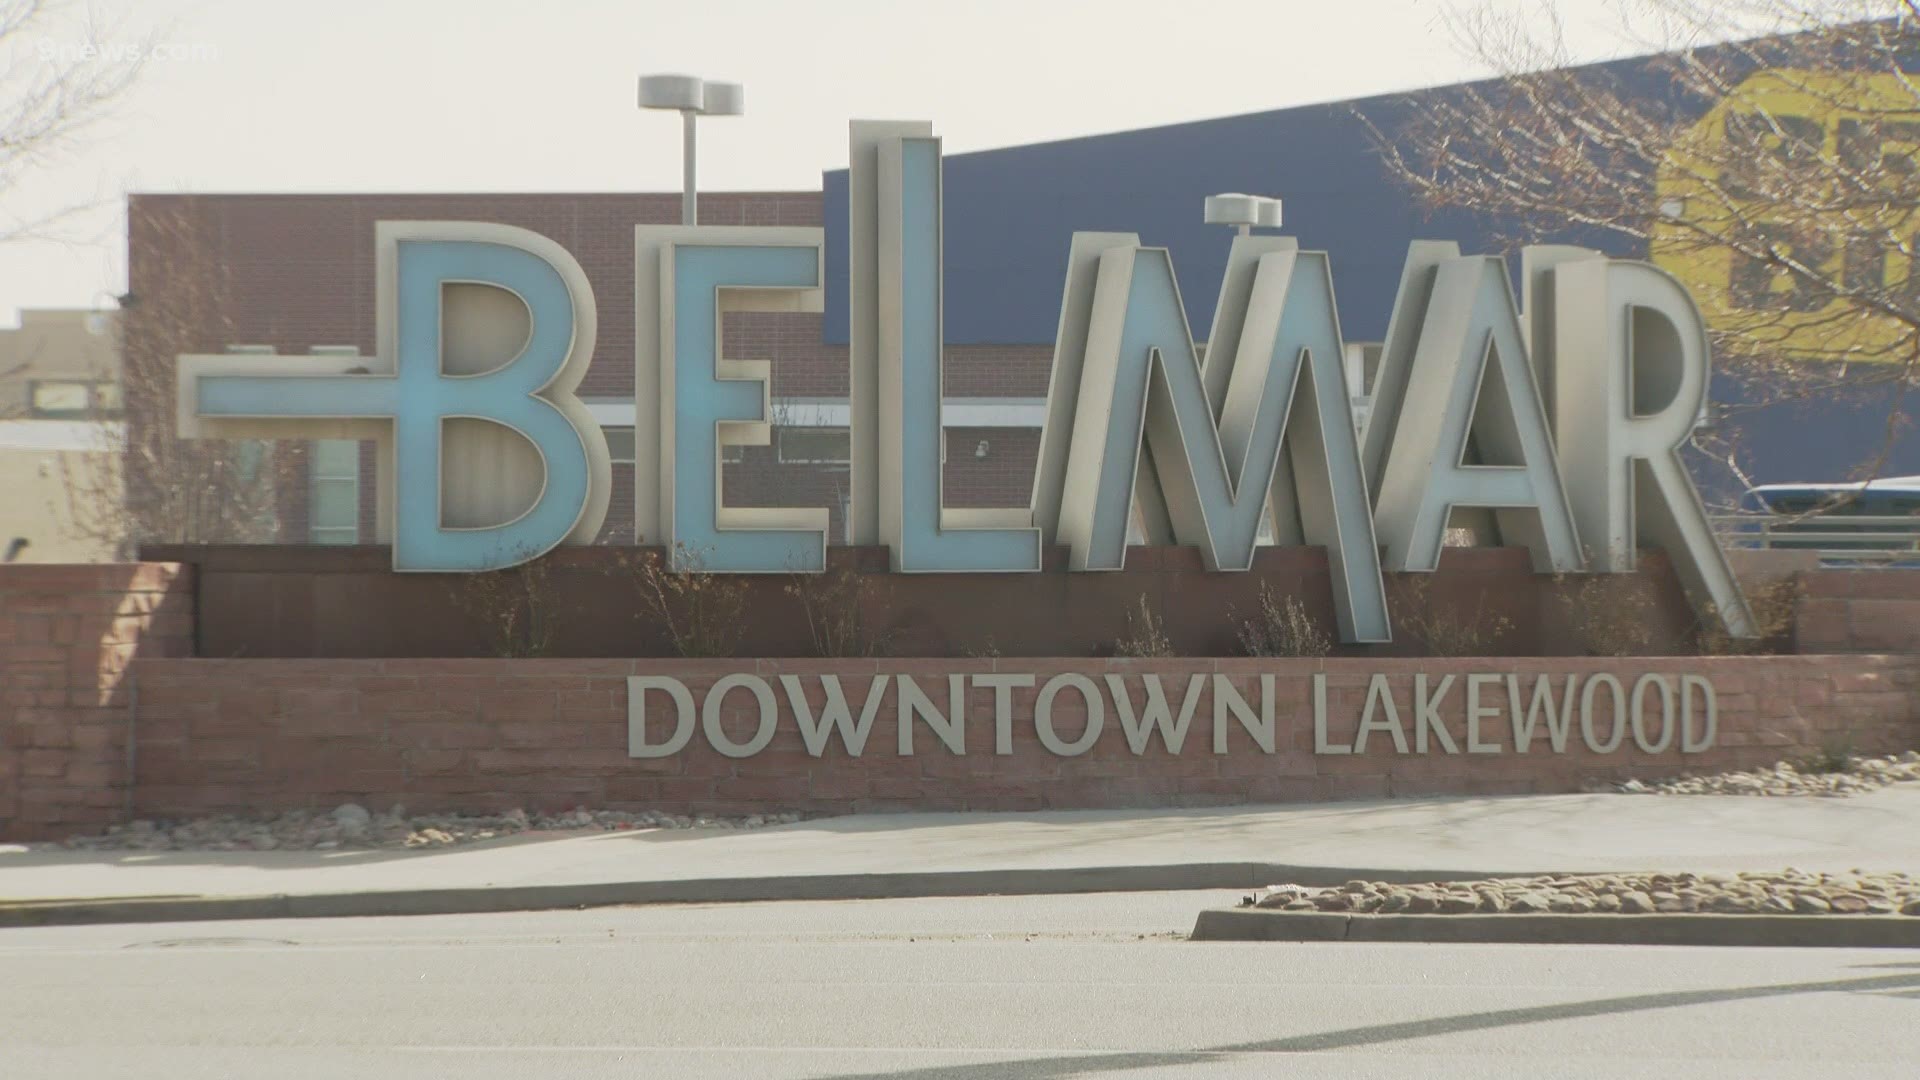 Records from the Jefferson County Trustees website show the Belmar shopping center owes $108 million on a $111 million loan.